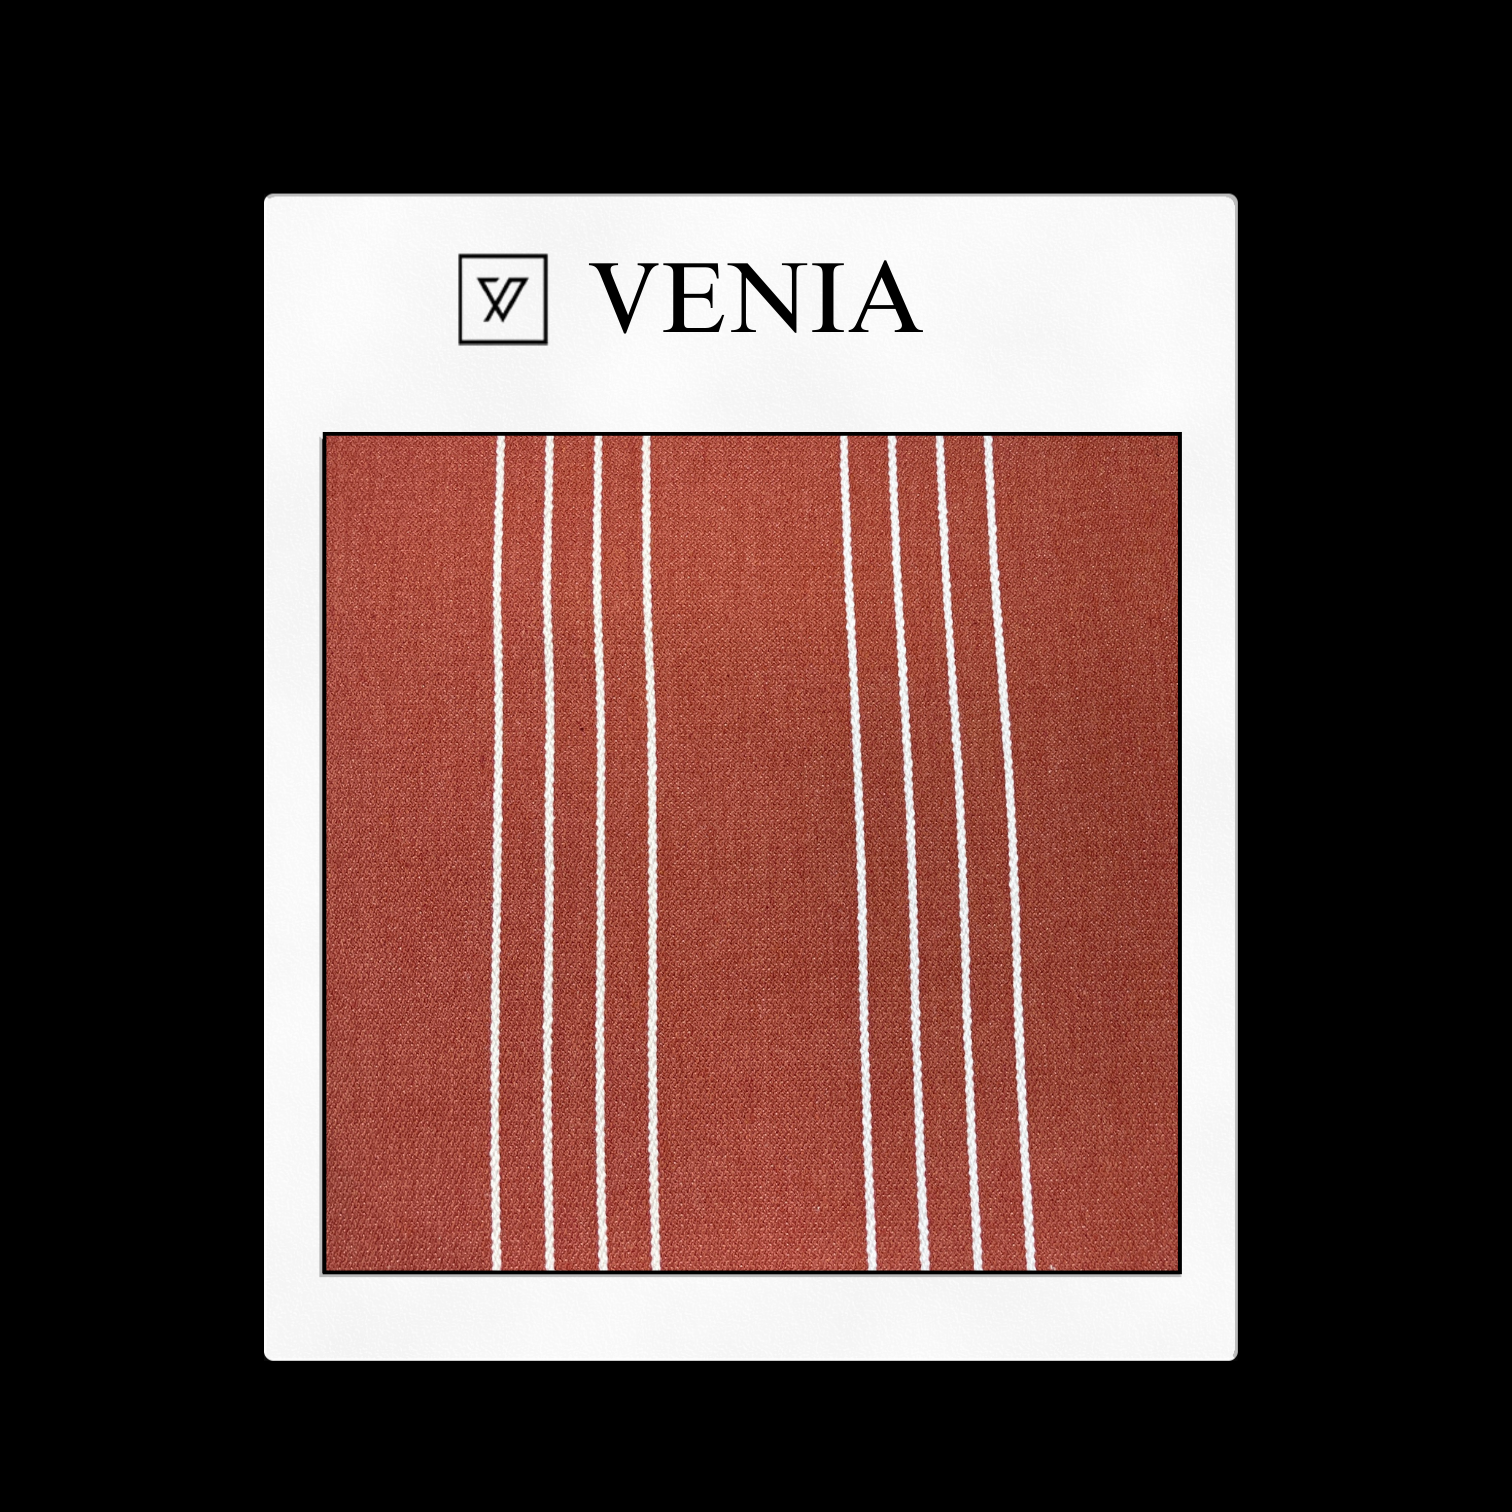 Classic red and white striped fabric, creating a sophisticated and versatile design for curtains, blinds, cushions, and more.piece of curtain and upholstery fabric on a 'VENIA' monogrammed mockup